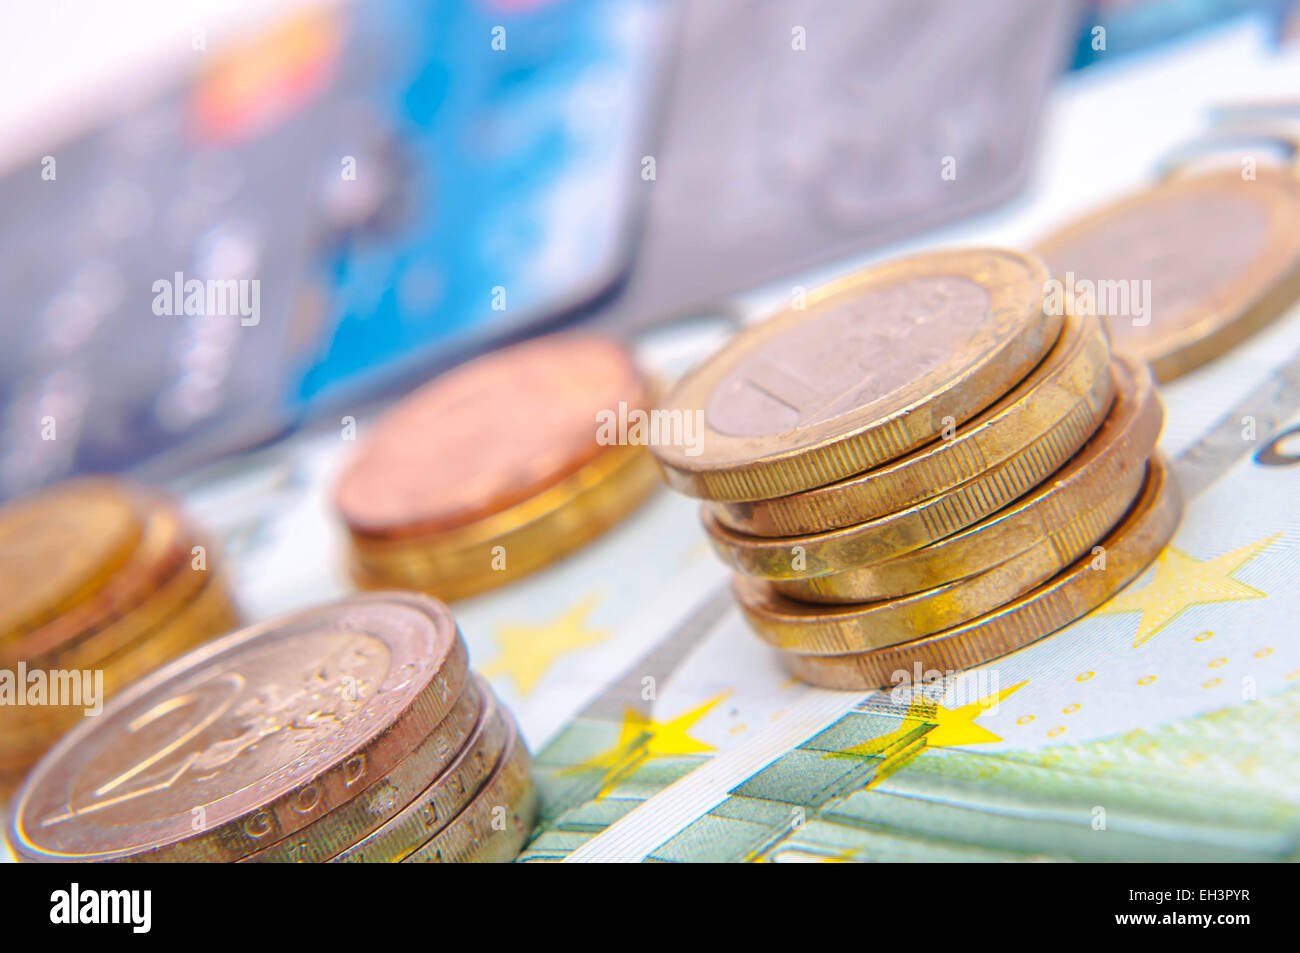 A Tower Of Euro Coins Banknote European Currency Stock Photo Alamy